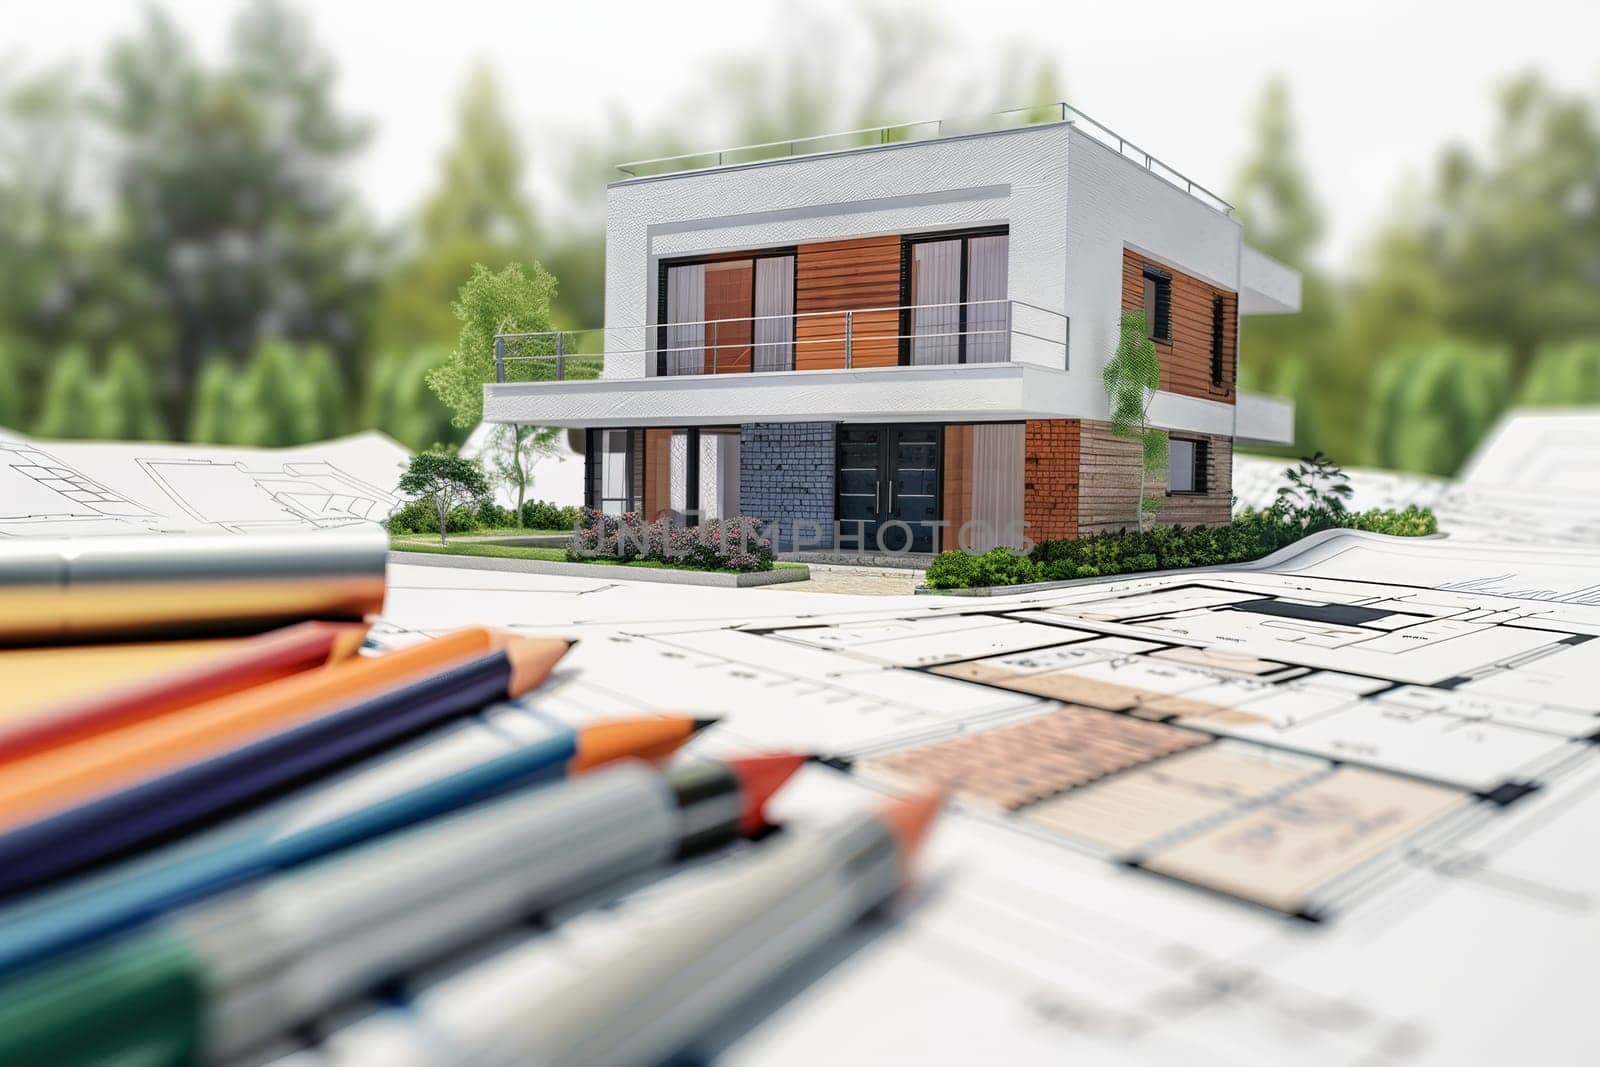 A creative drawing of a house resting on top of detailed blueprints, showcasing a vision for a new construction project.